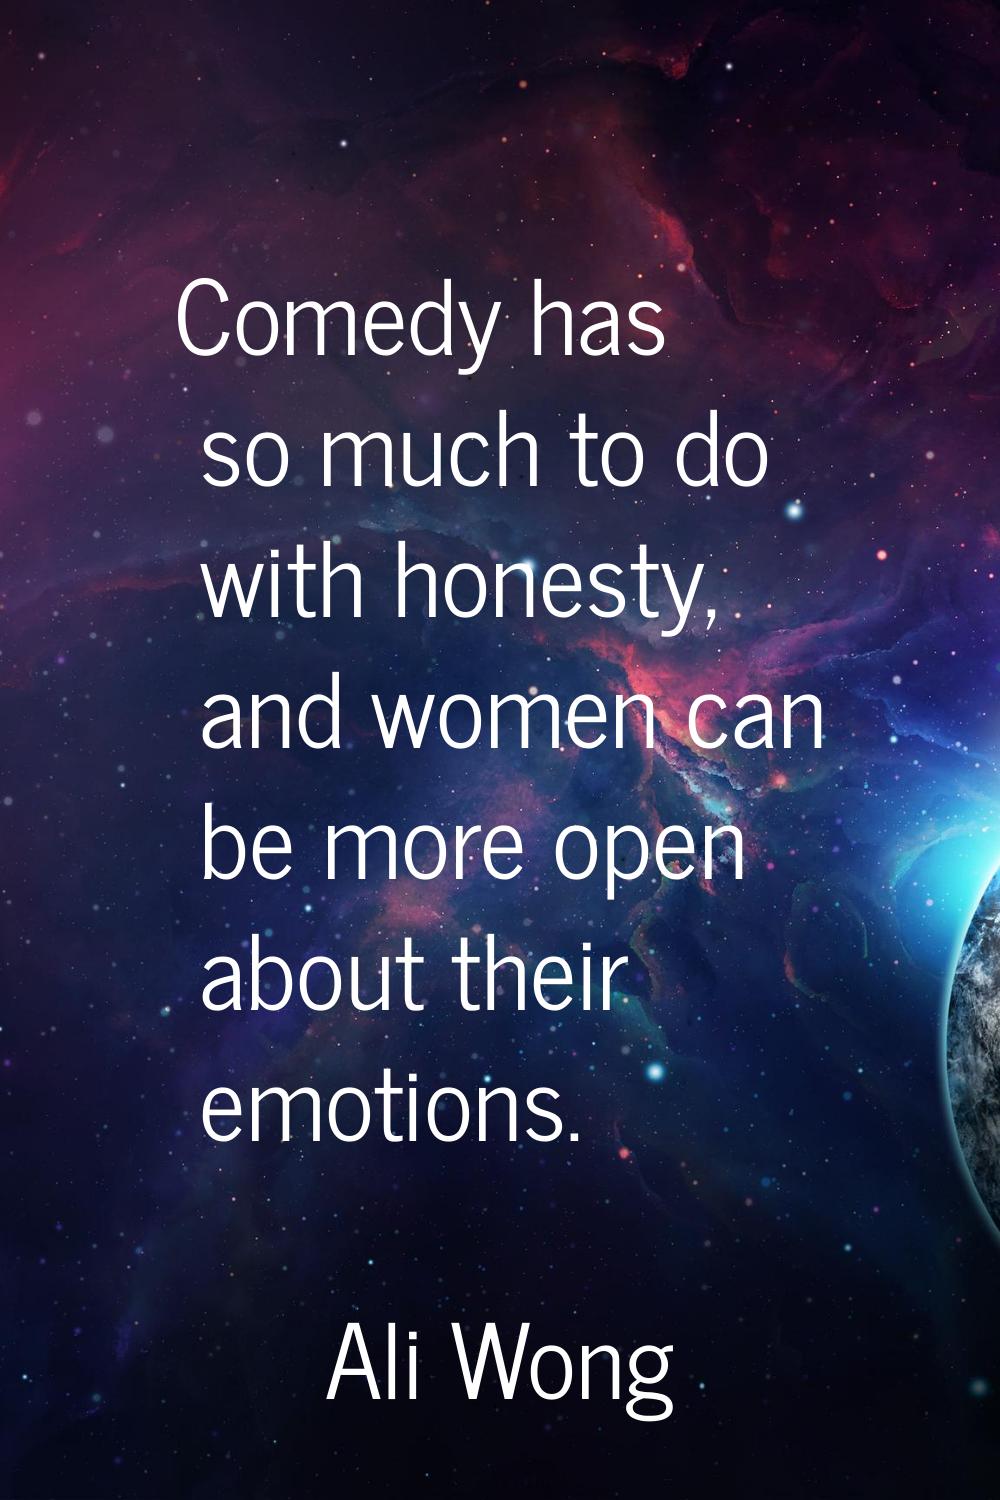 Comedy has so much to do with honesty, and women can be more open about their emotions.